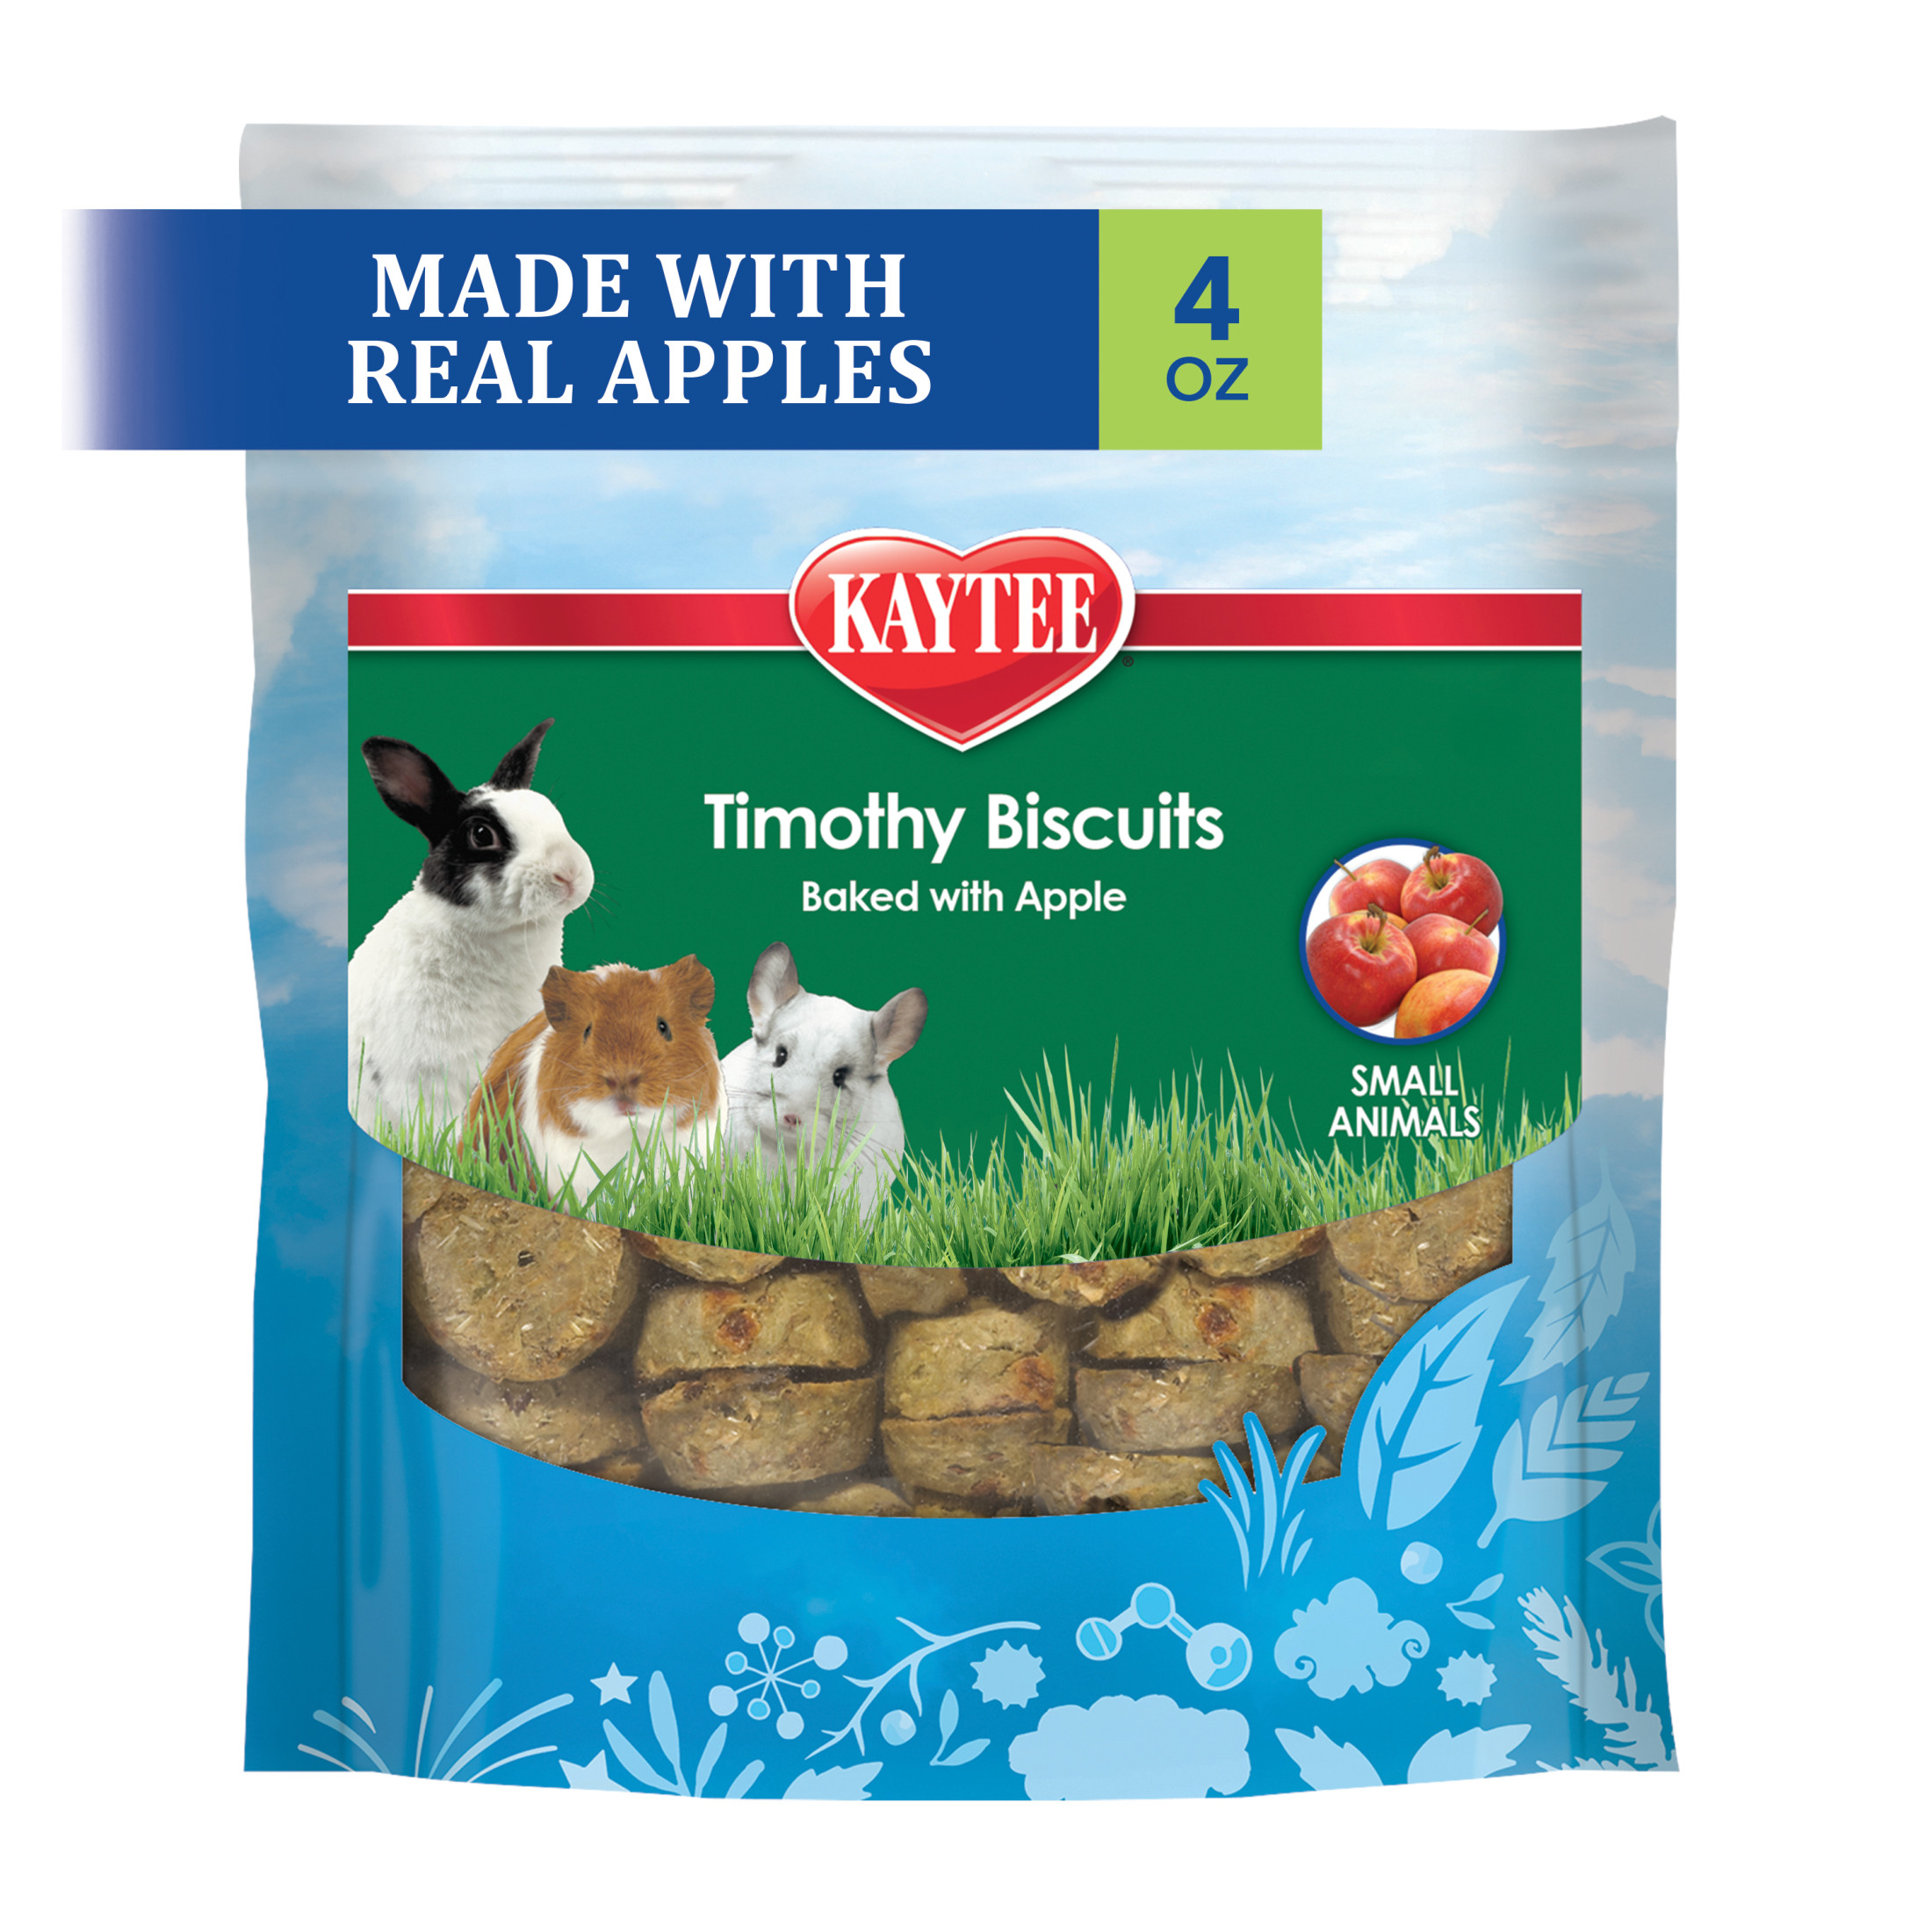 Kaytee Timothy Biscuits Baked Treat, Apple, 4 oz - image 1 of 11